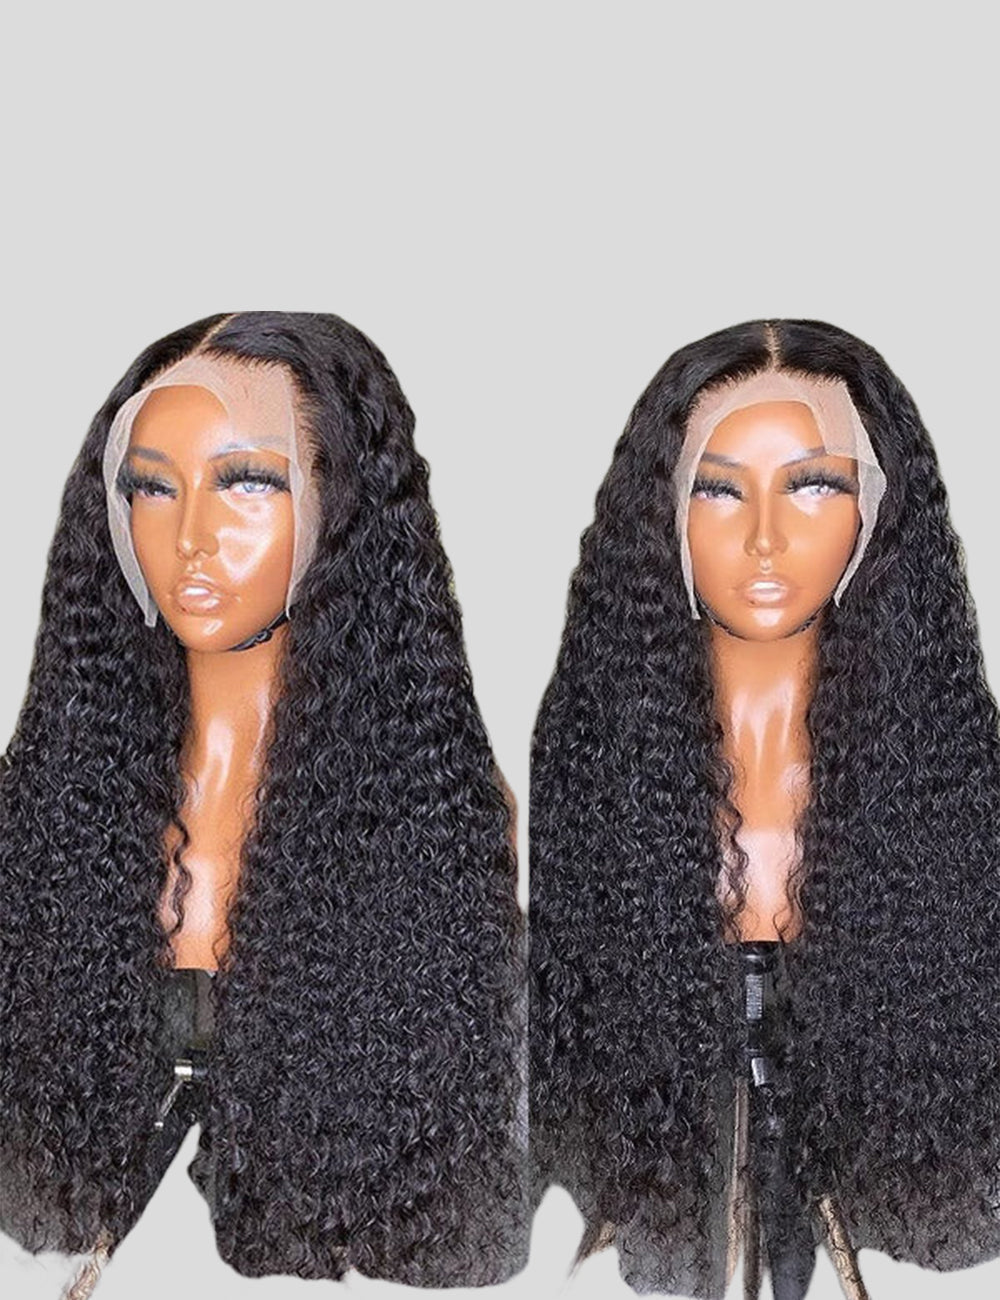 Kinky Curly Lace Front Wigs 13x4 Lace Frontal Wig Curly Hair HD Transparent Human Hair Wigs